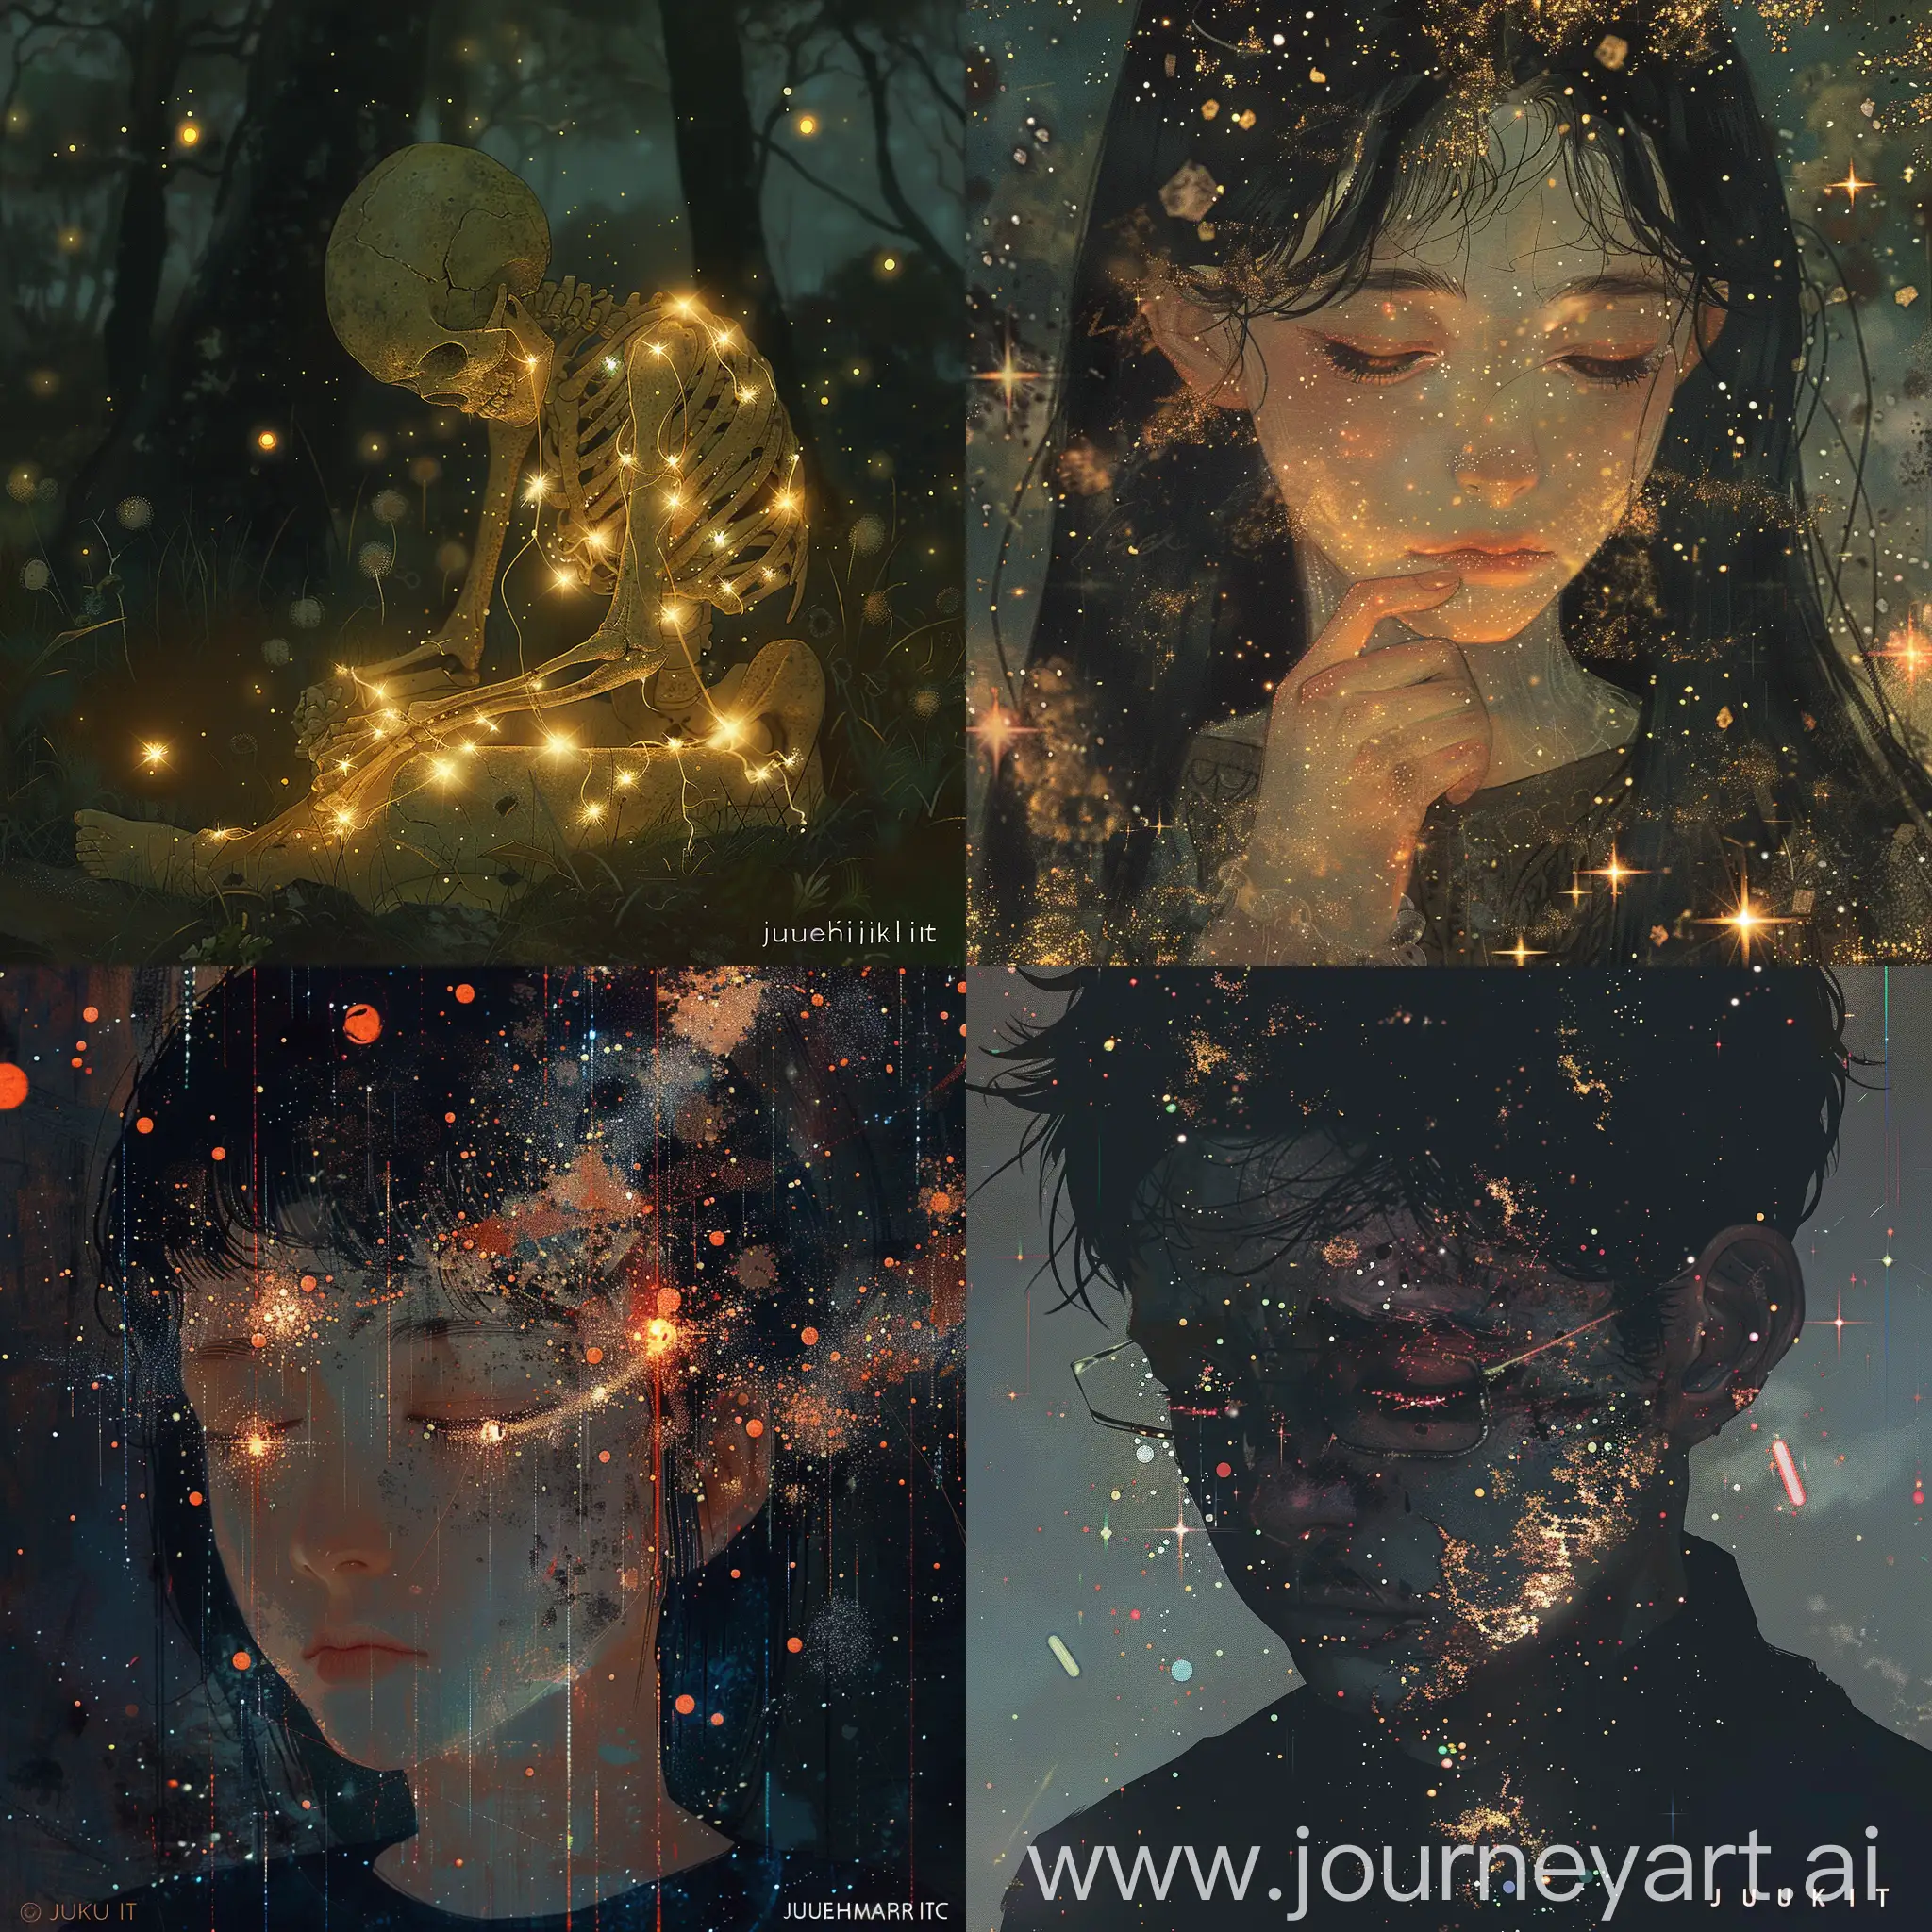 Surreal-Melancholy-Lost-Souls-Amidst-Glowing-Stars